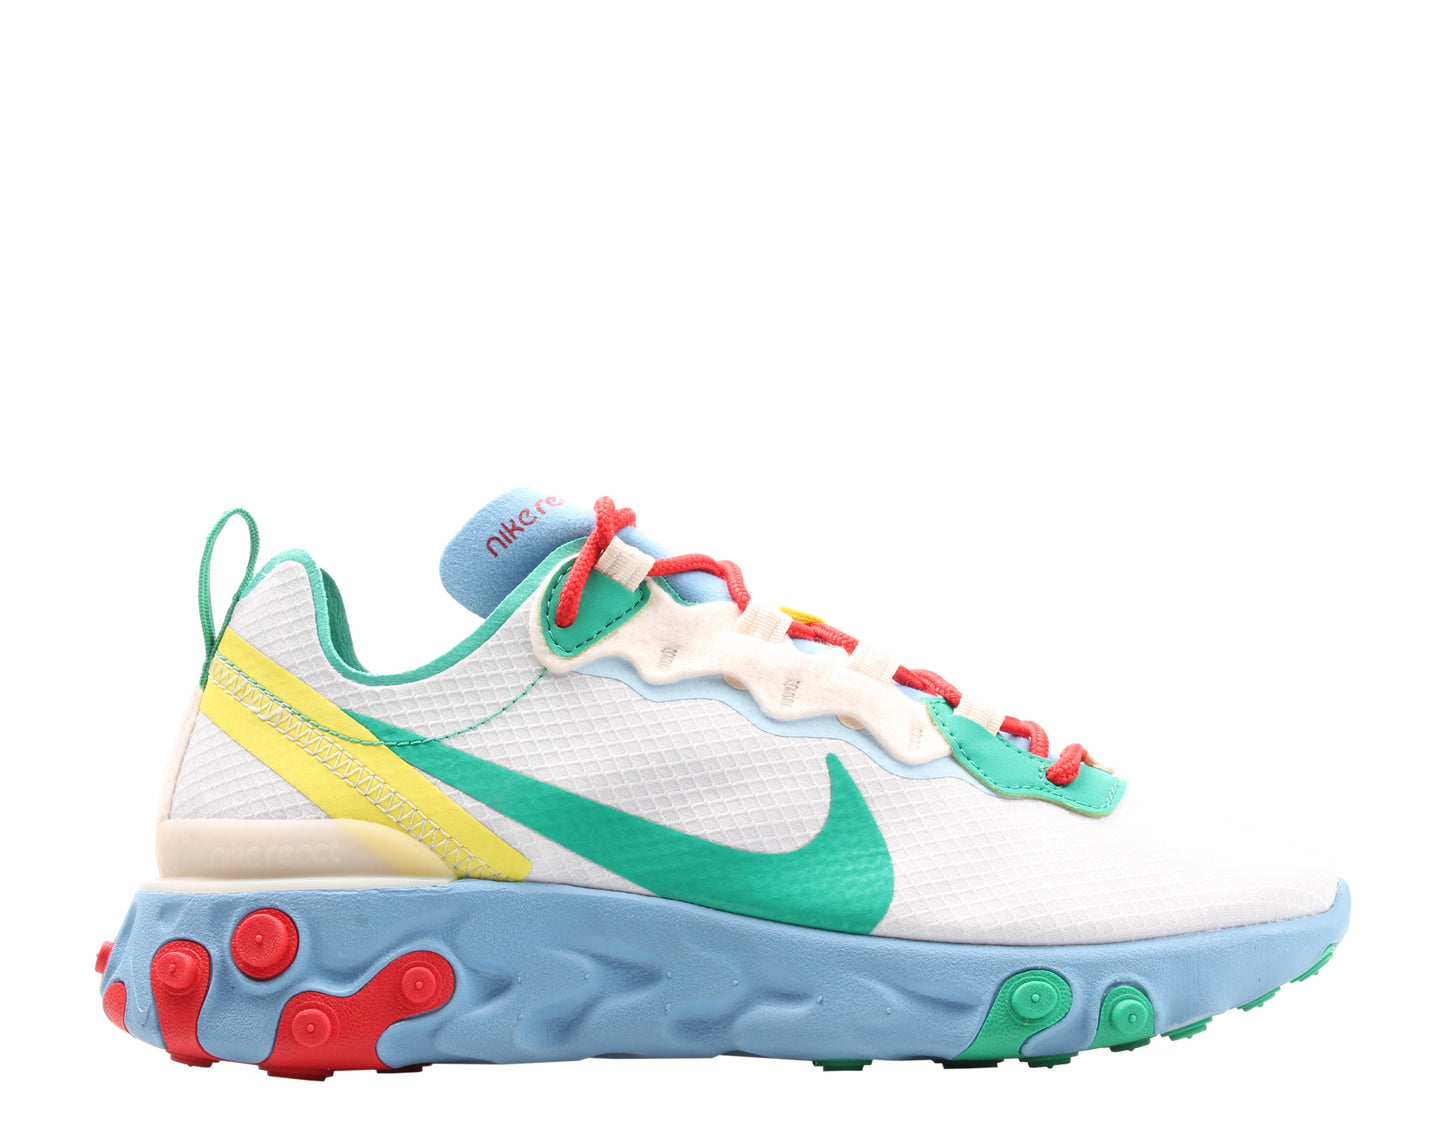 Nike React Element 55 SE Guava Ice/Green-Blue Men's Running Shoes CT1142-800